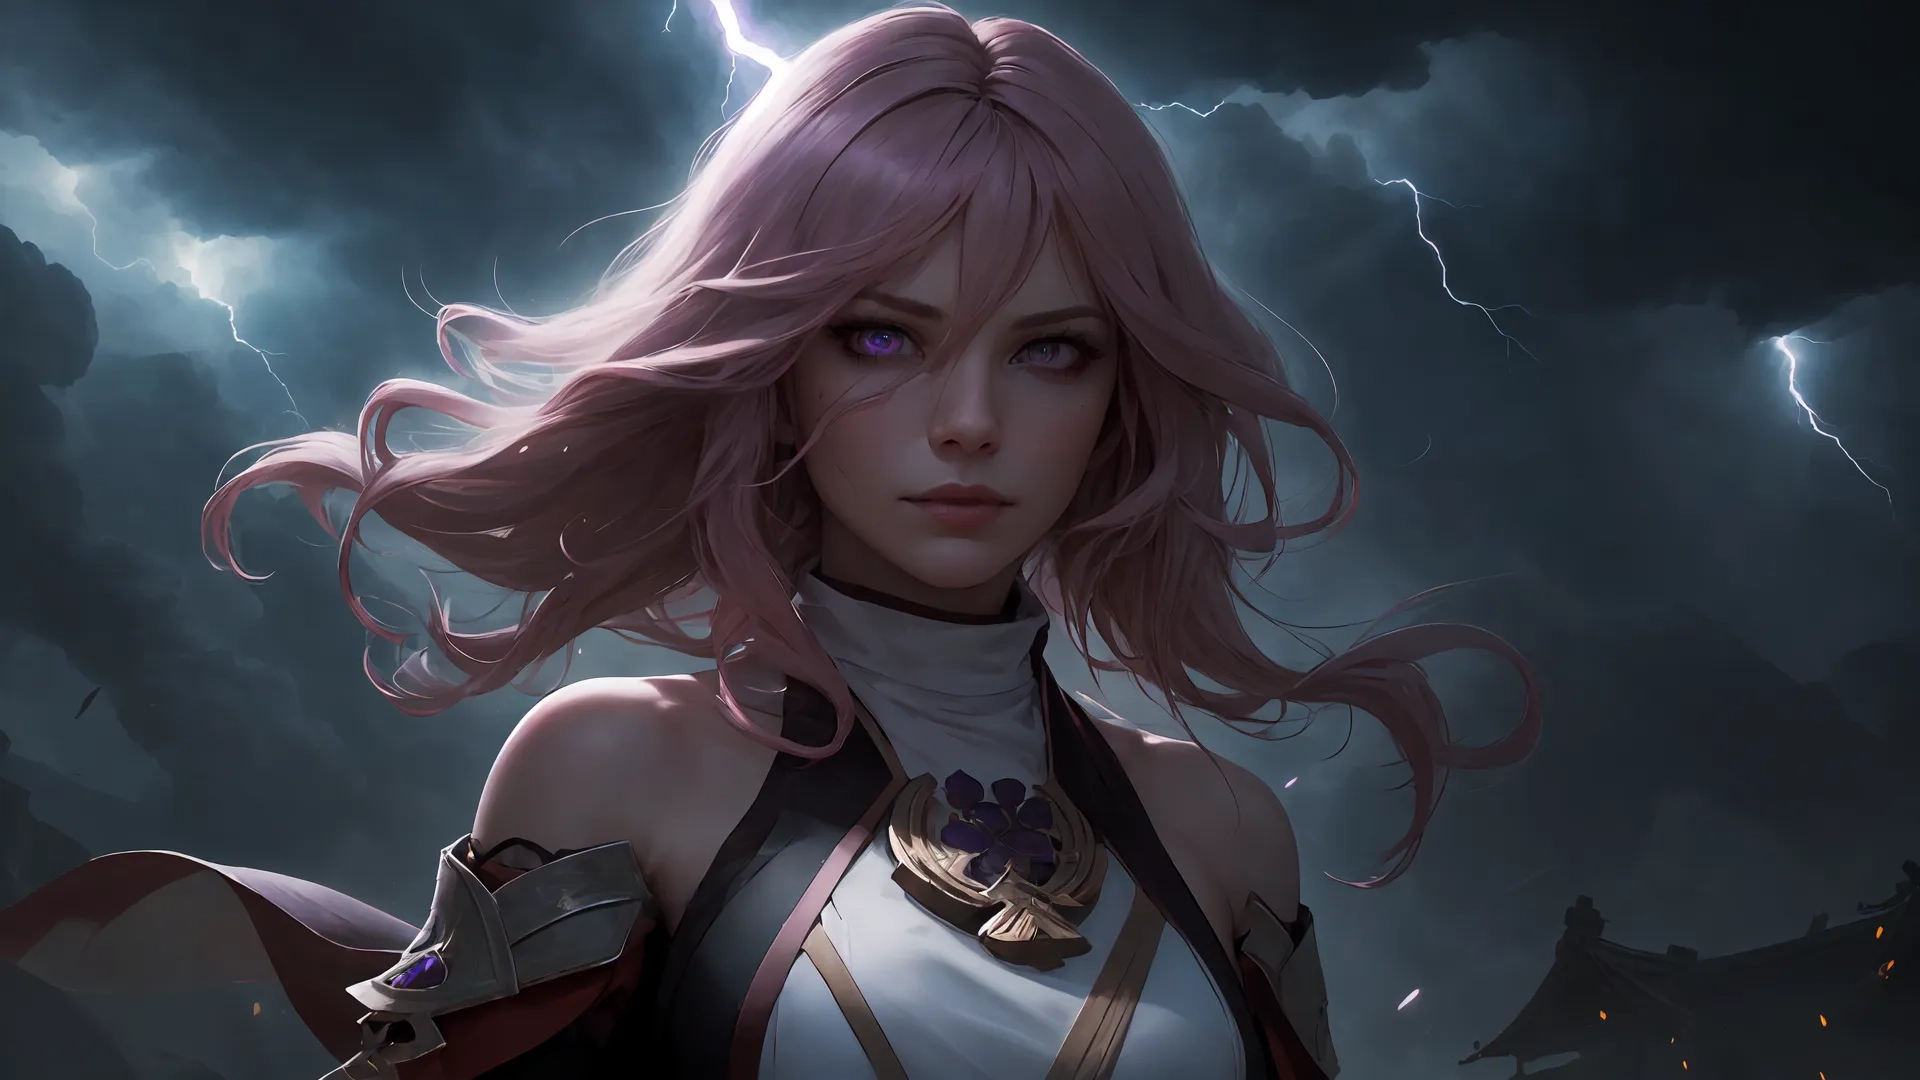 a woman in armor with a large purple hair standing under lightning over her shoulders and holding a sword in front of a stormy sky view
